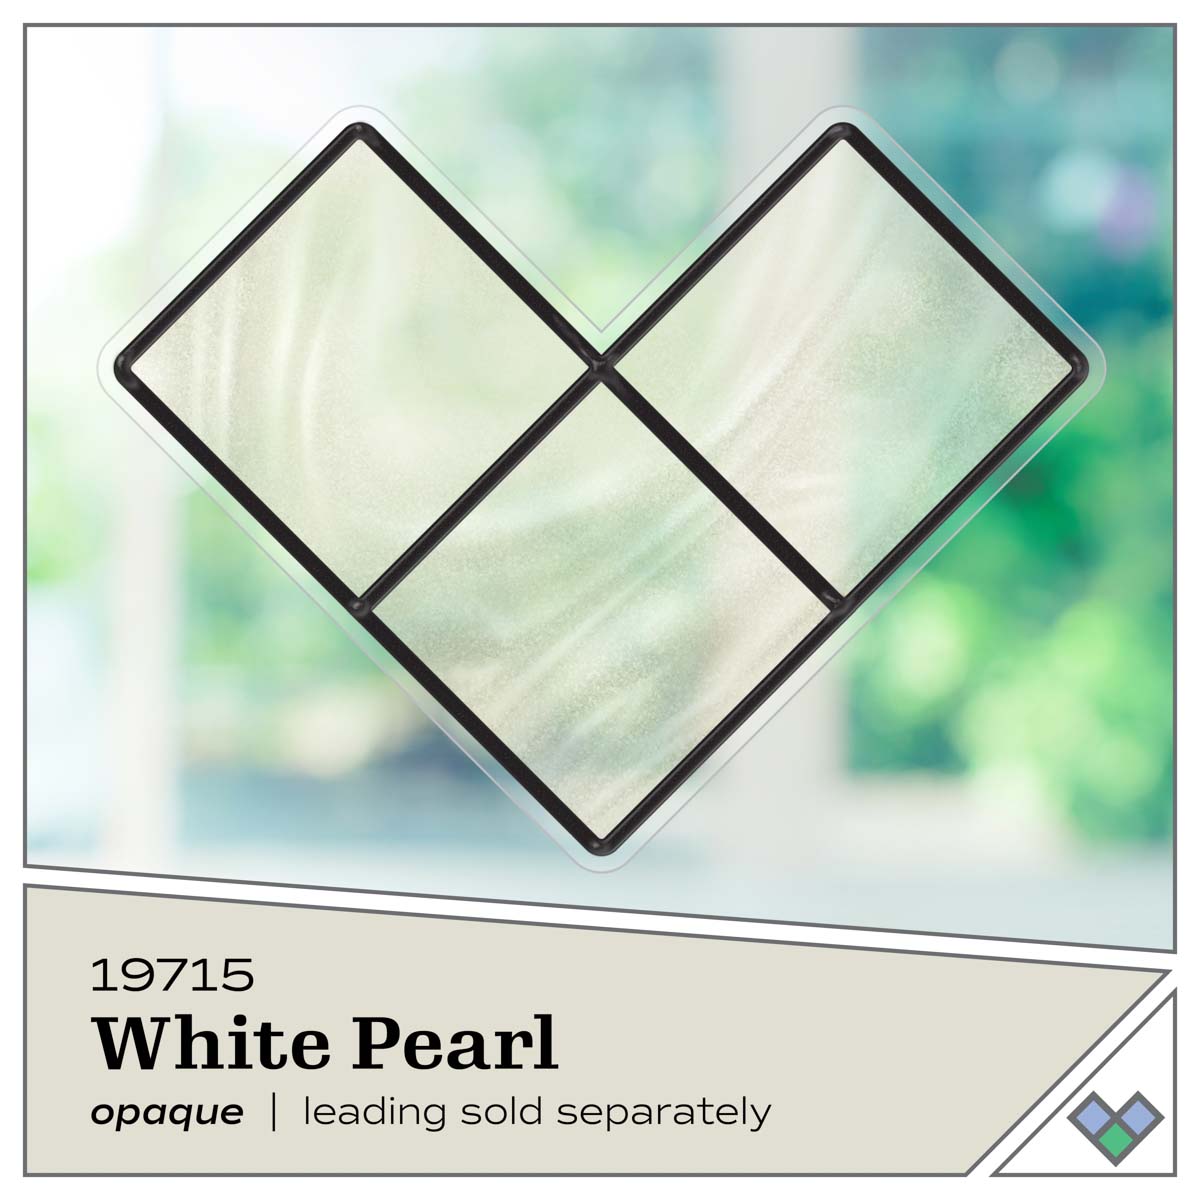 Gallery Glass ® Stained Glass Effect Paint - White Pearl, 2 oz. - 19715